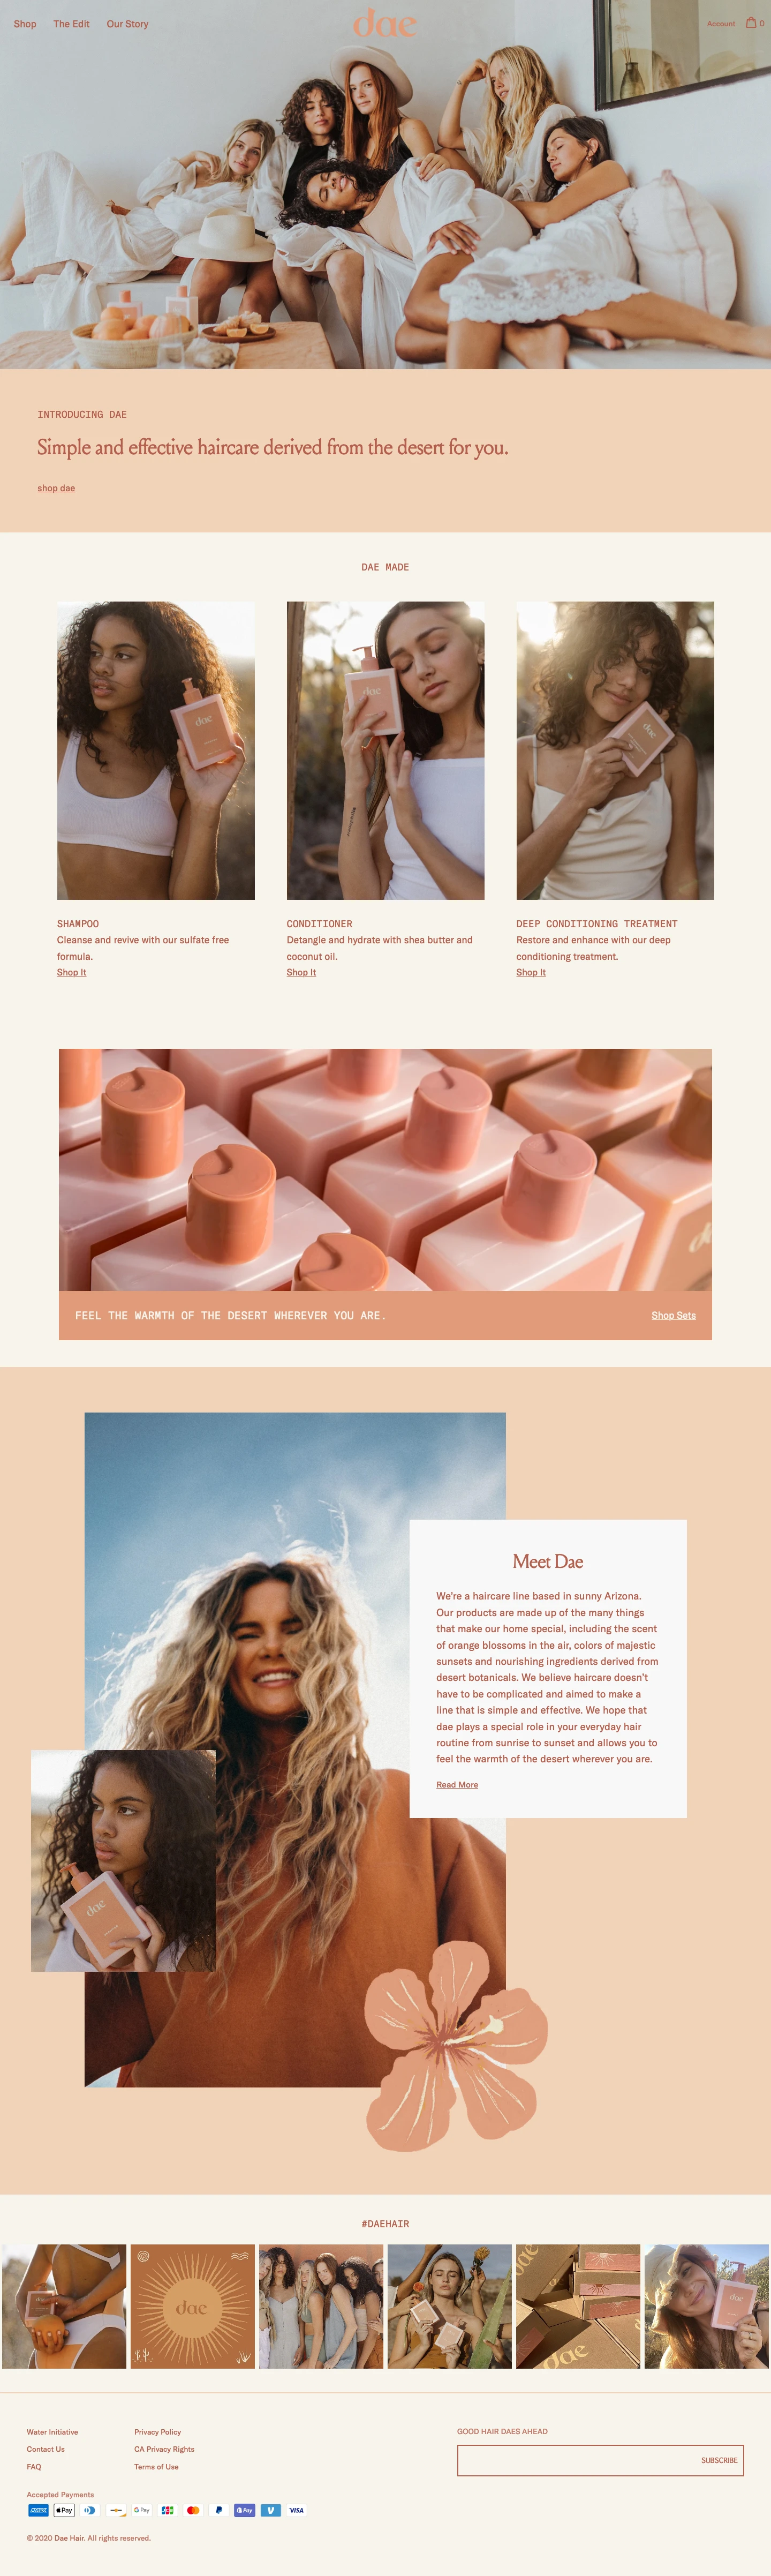 Dae Hair Landing Page Example: We’re a haircare line based in sunny Arizona. Our products are made up of the many things that make the desert special, including the scent of orange blossoms in the air, colors of majestic sunsets and nourishing ingredients derived from desert botanicals.